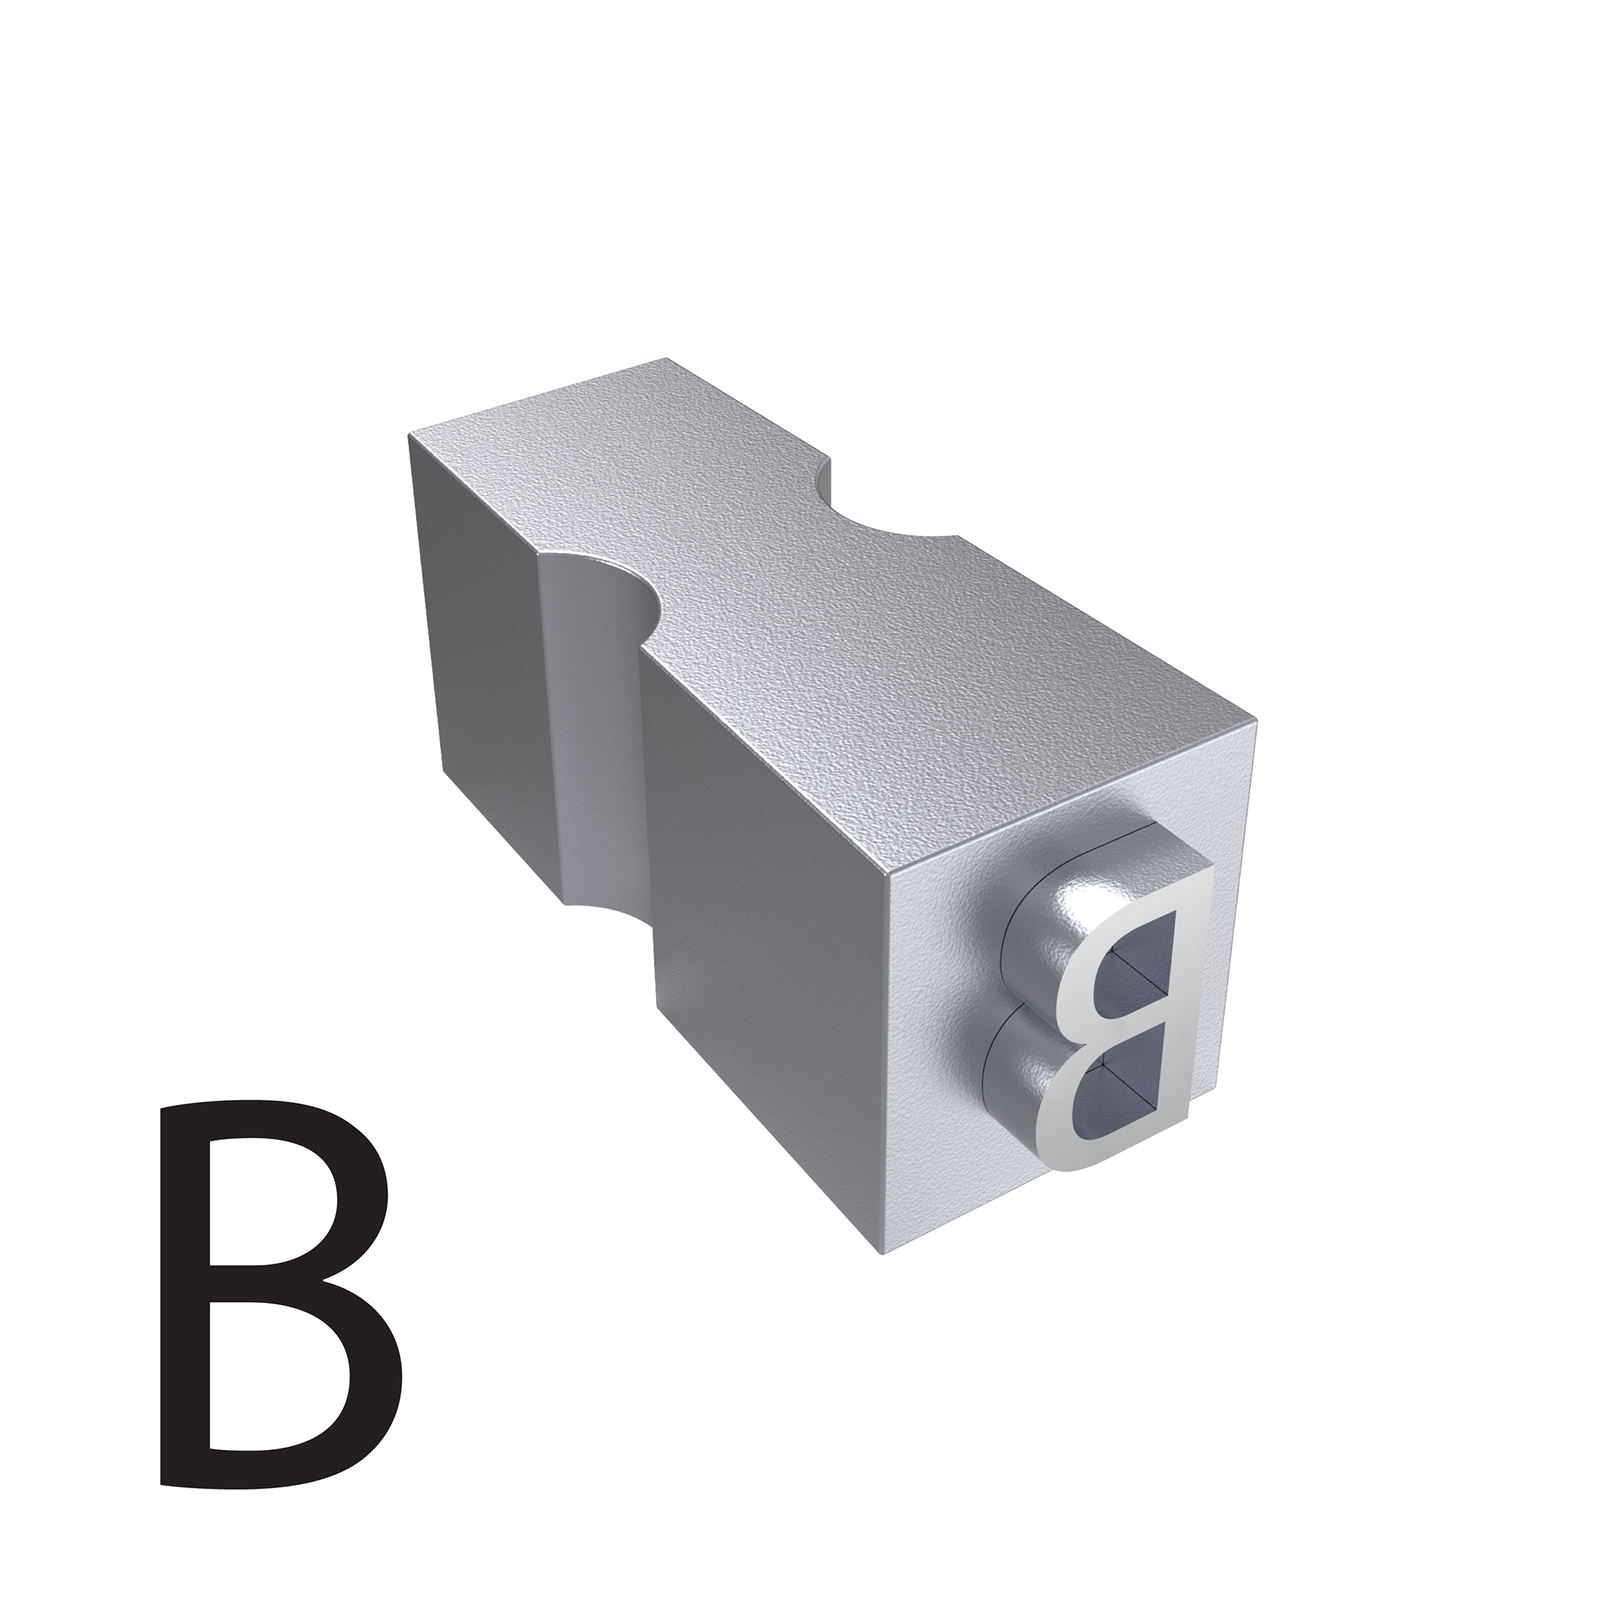 Type of letter B for hot ink roll printers